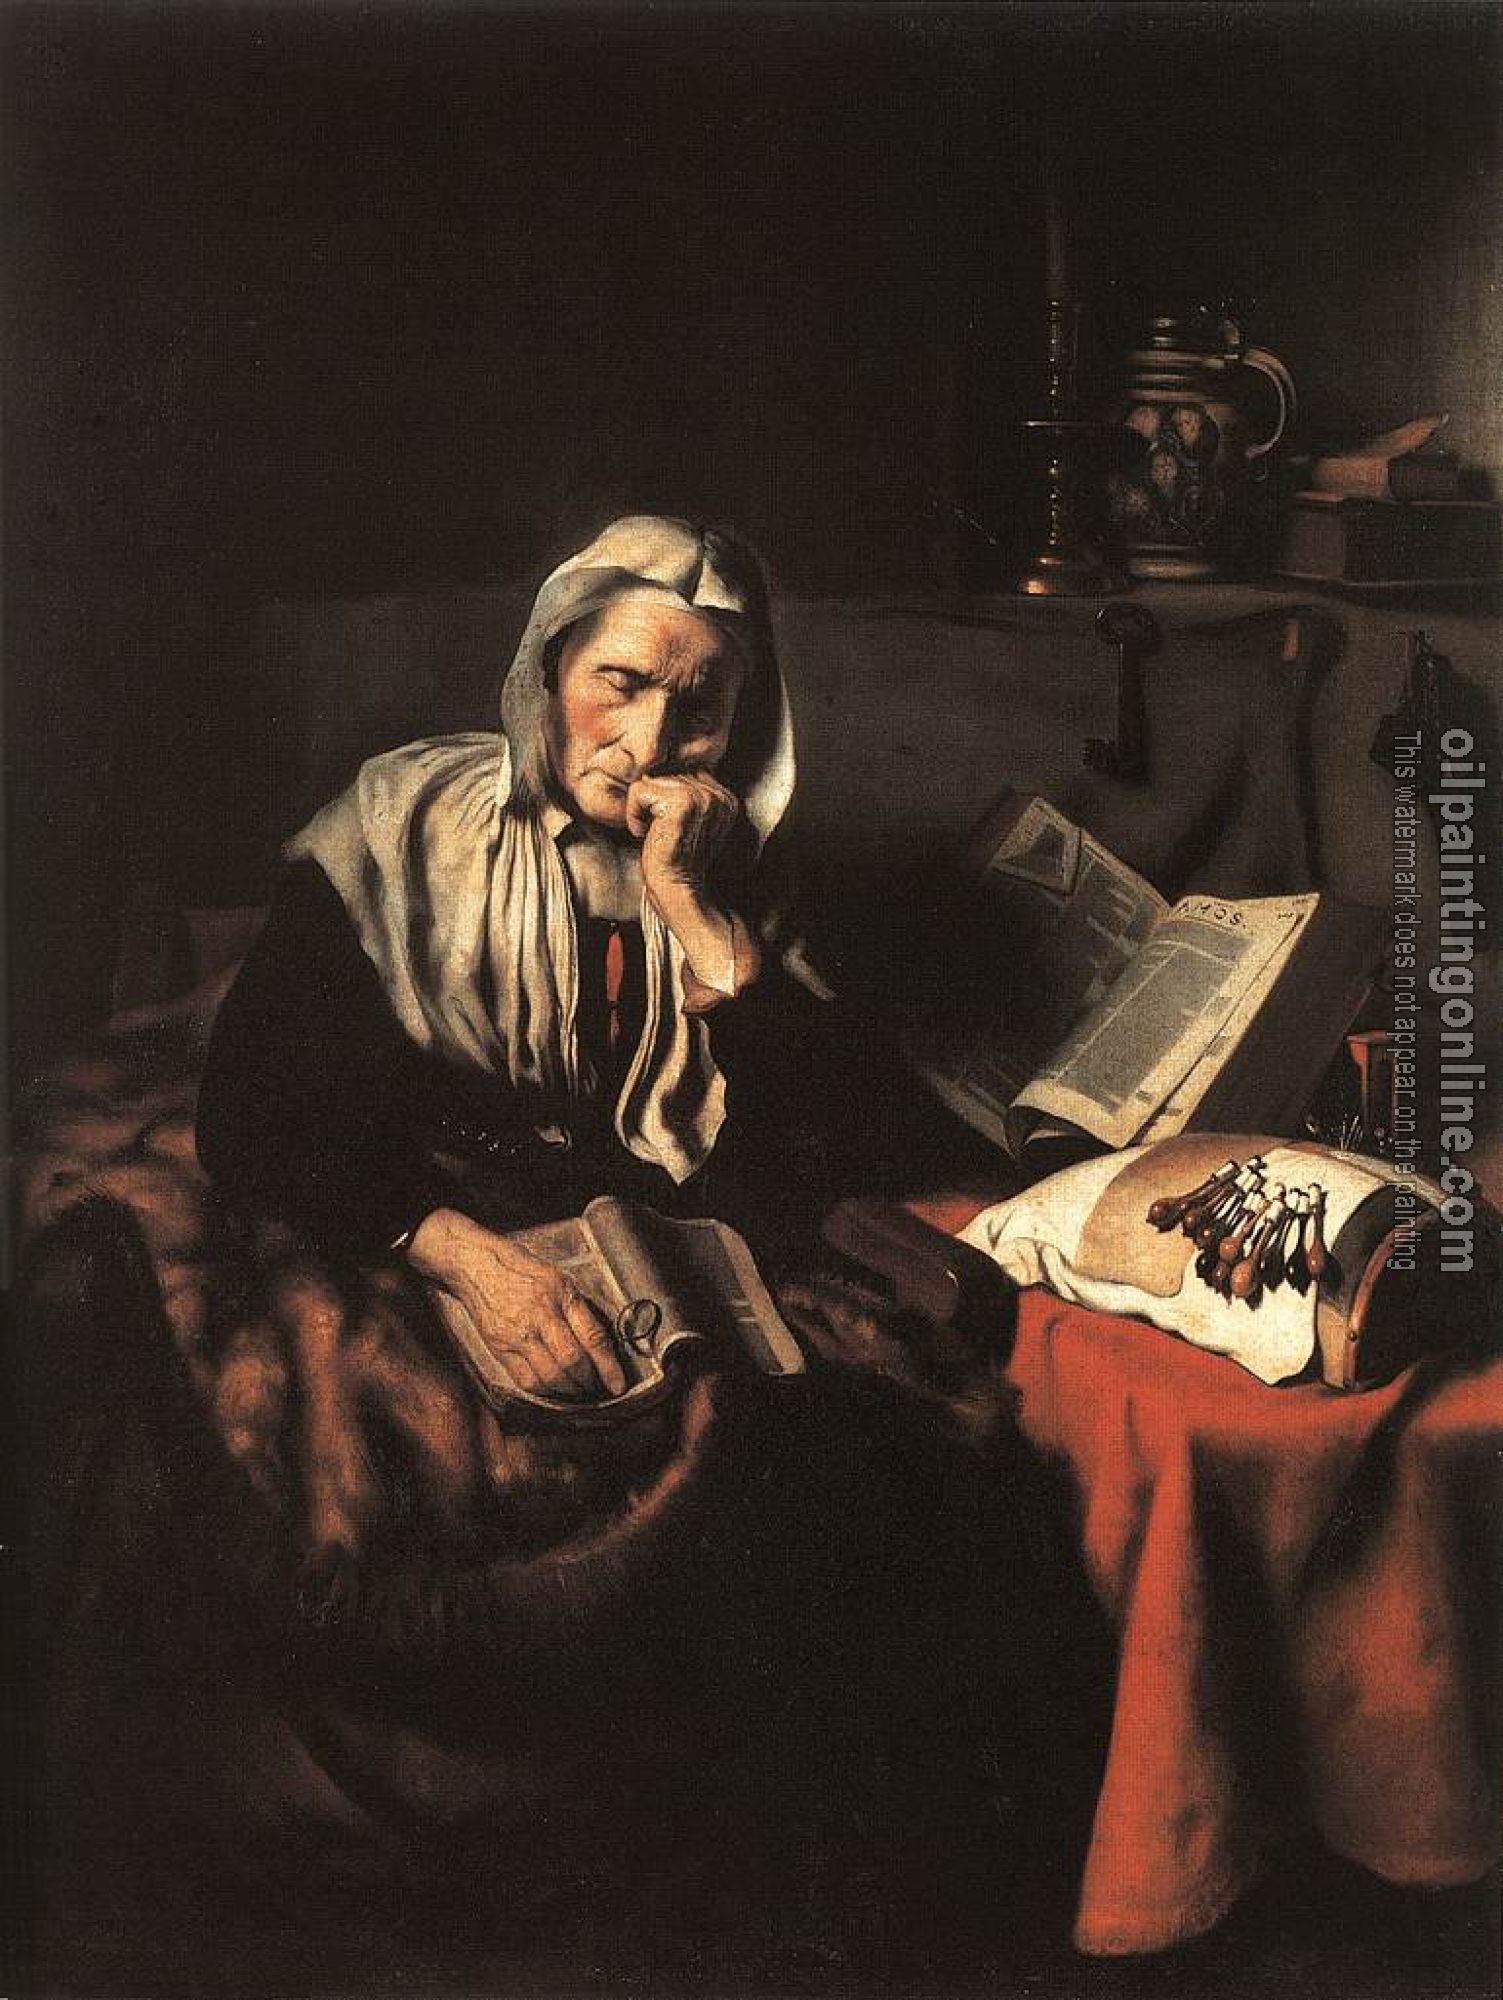 Maes, Nicolaes - Old Woman Dozing